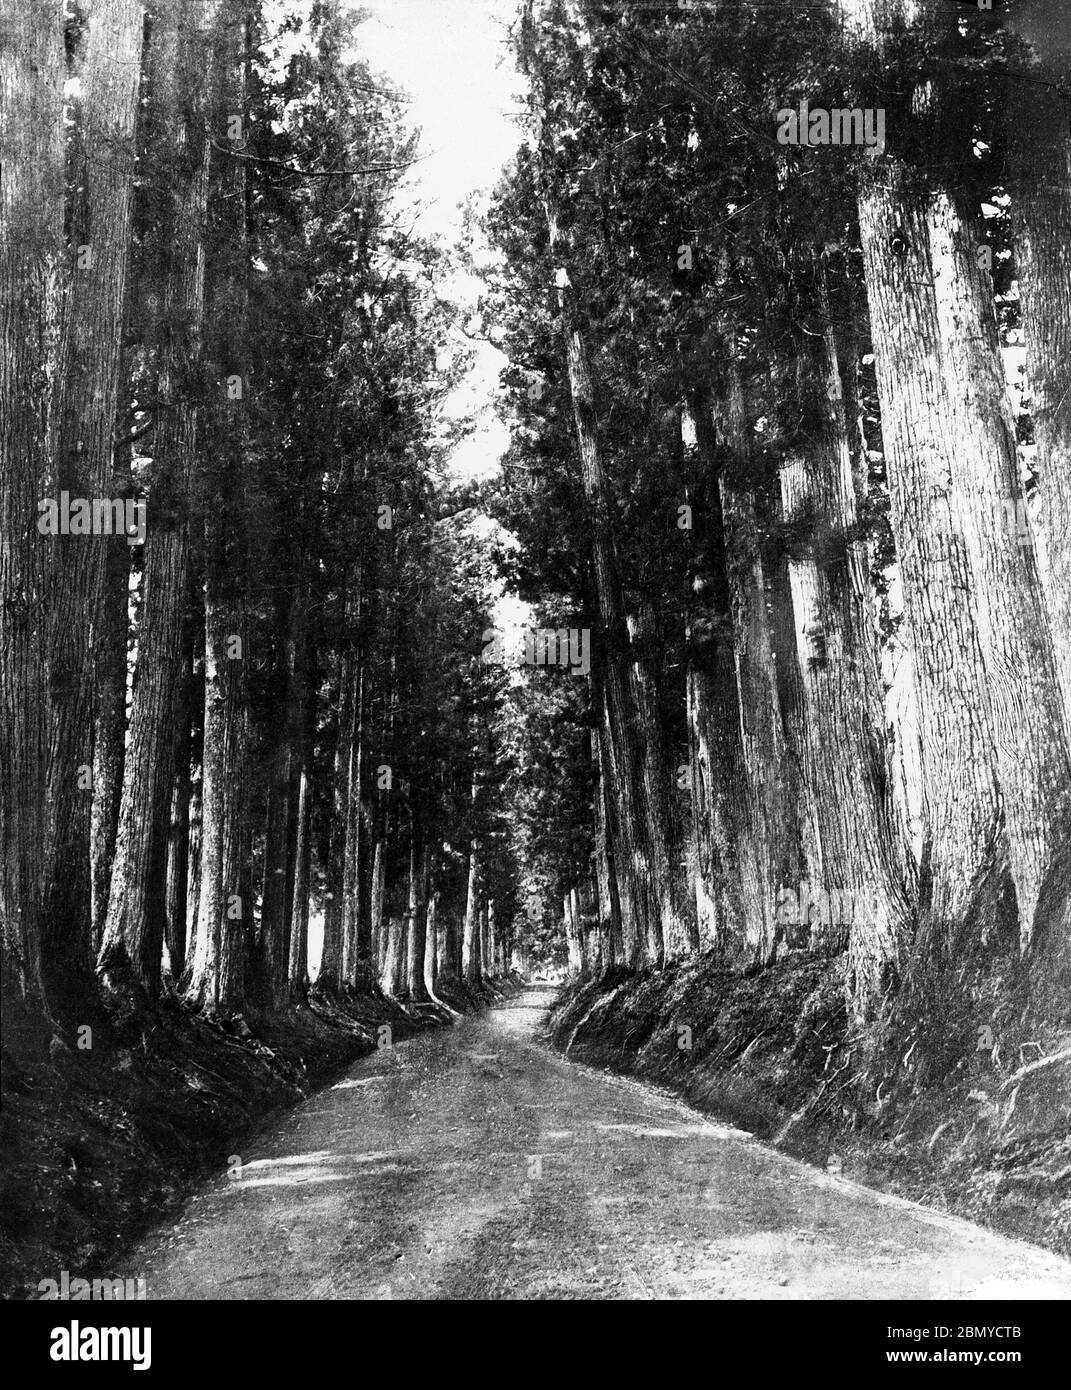 [ 1890s Japan - Nikko Road ] —   The road to Nikko. The cedars were donated by Matsudaira Masatsuna on the 33rd anniversary of the death of Shogun Tokugawa Ieyasu.  From a series of glass slides published (but not photographed) by Scottish photographer George Washington Wilson (1823–1893). Wilson’s firm was one of the largest publishers of photographic prints in the world.  19th century vintage glass slide. Stock Photo